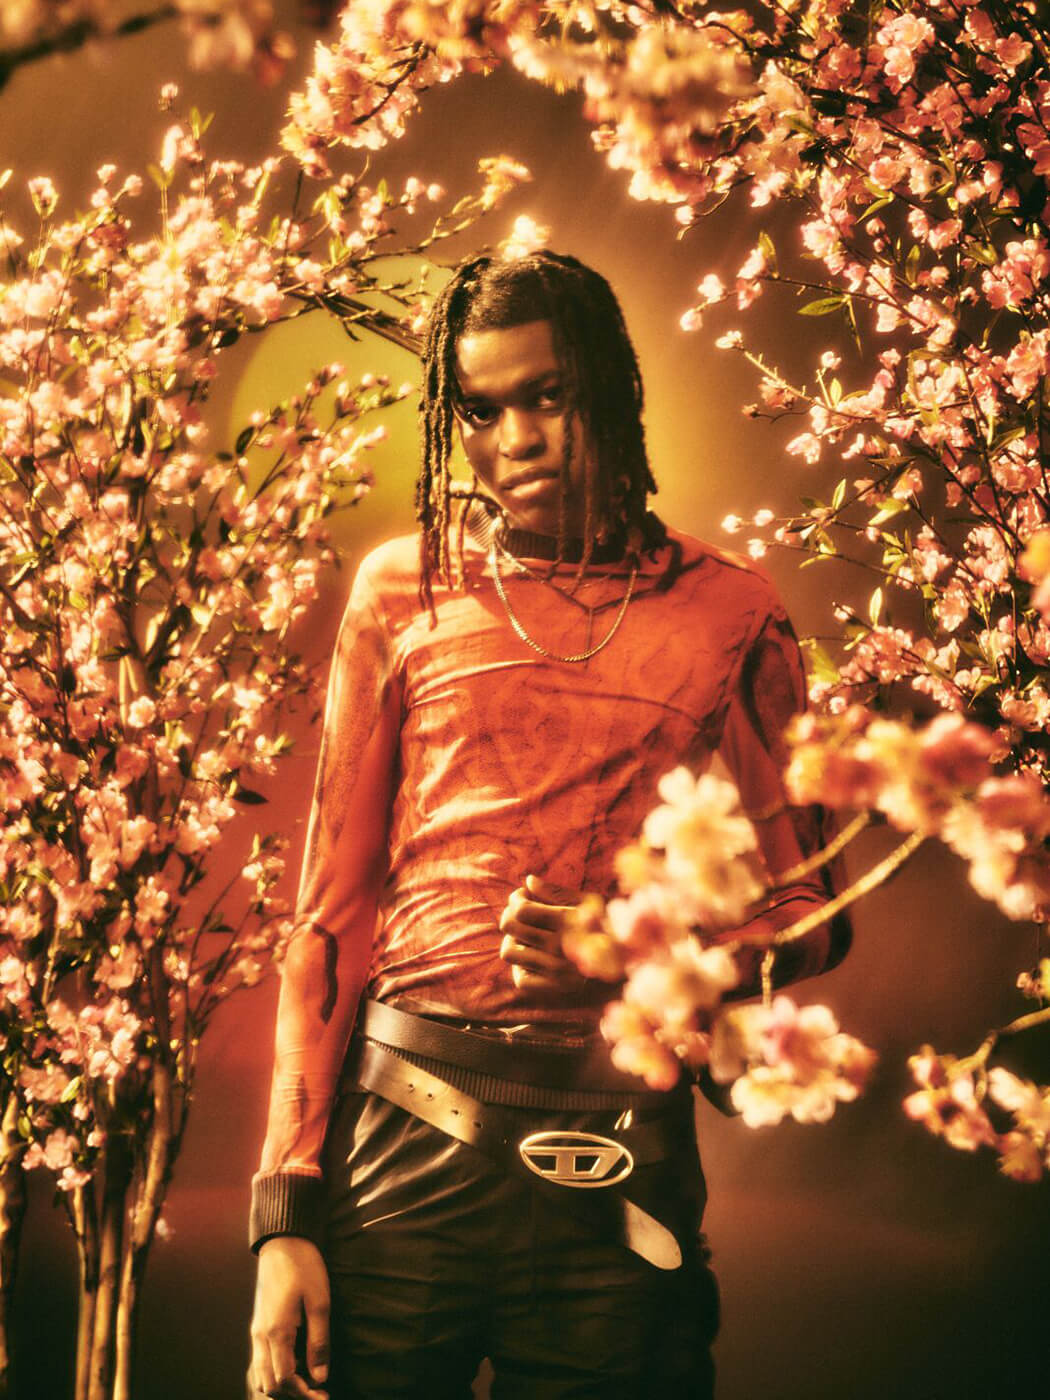 Jordan Adetunji surrounded by cherry blossoms and orange hues, photo by Frank Fieber